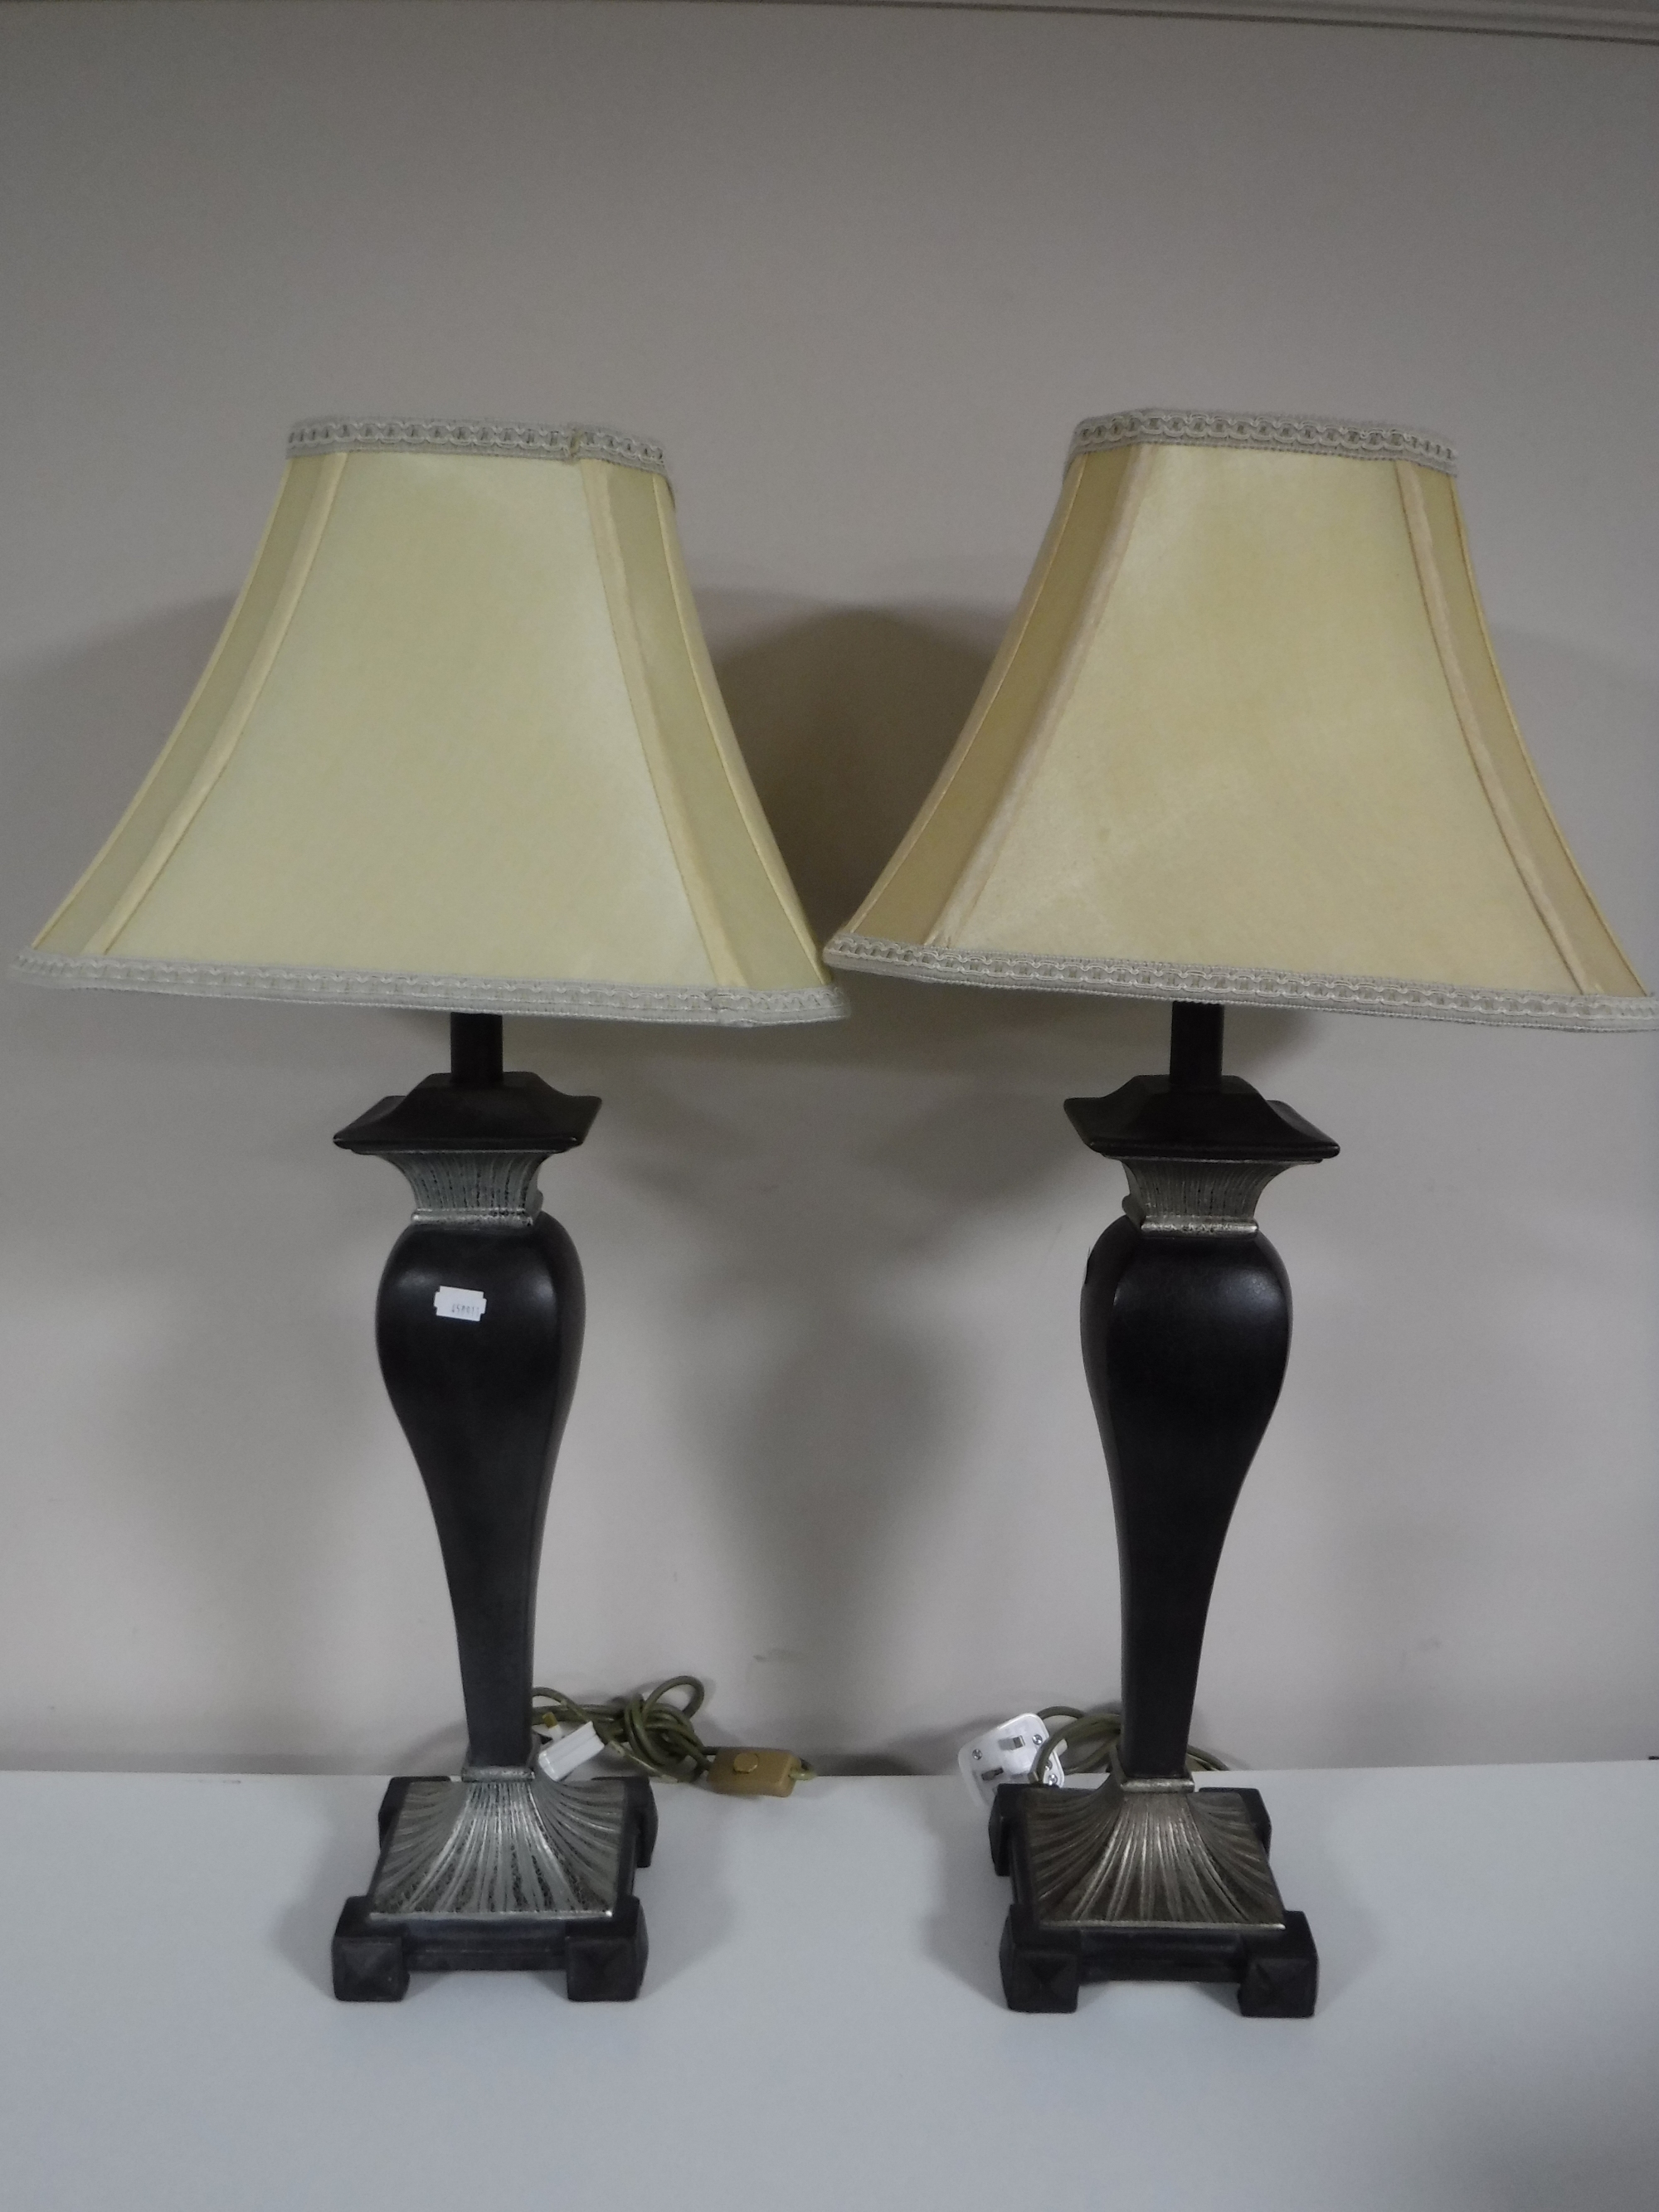 A pair of contemporary table lamps with shades